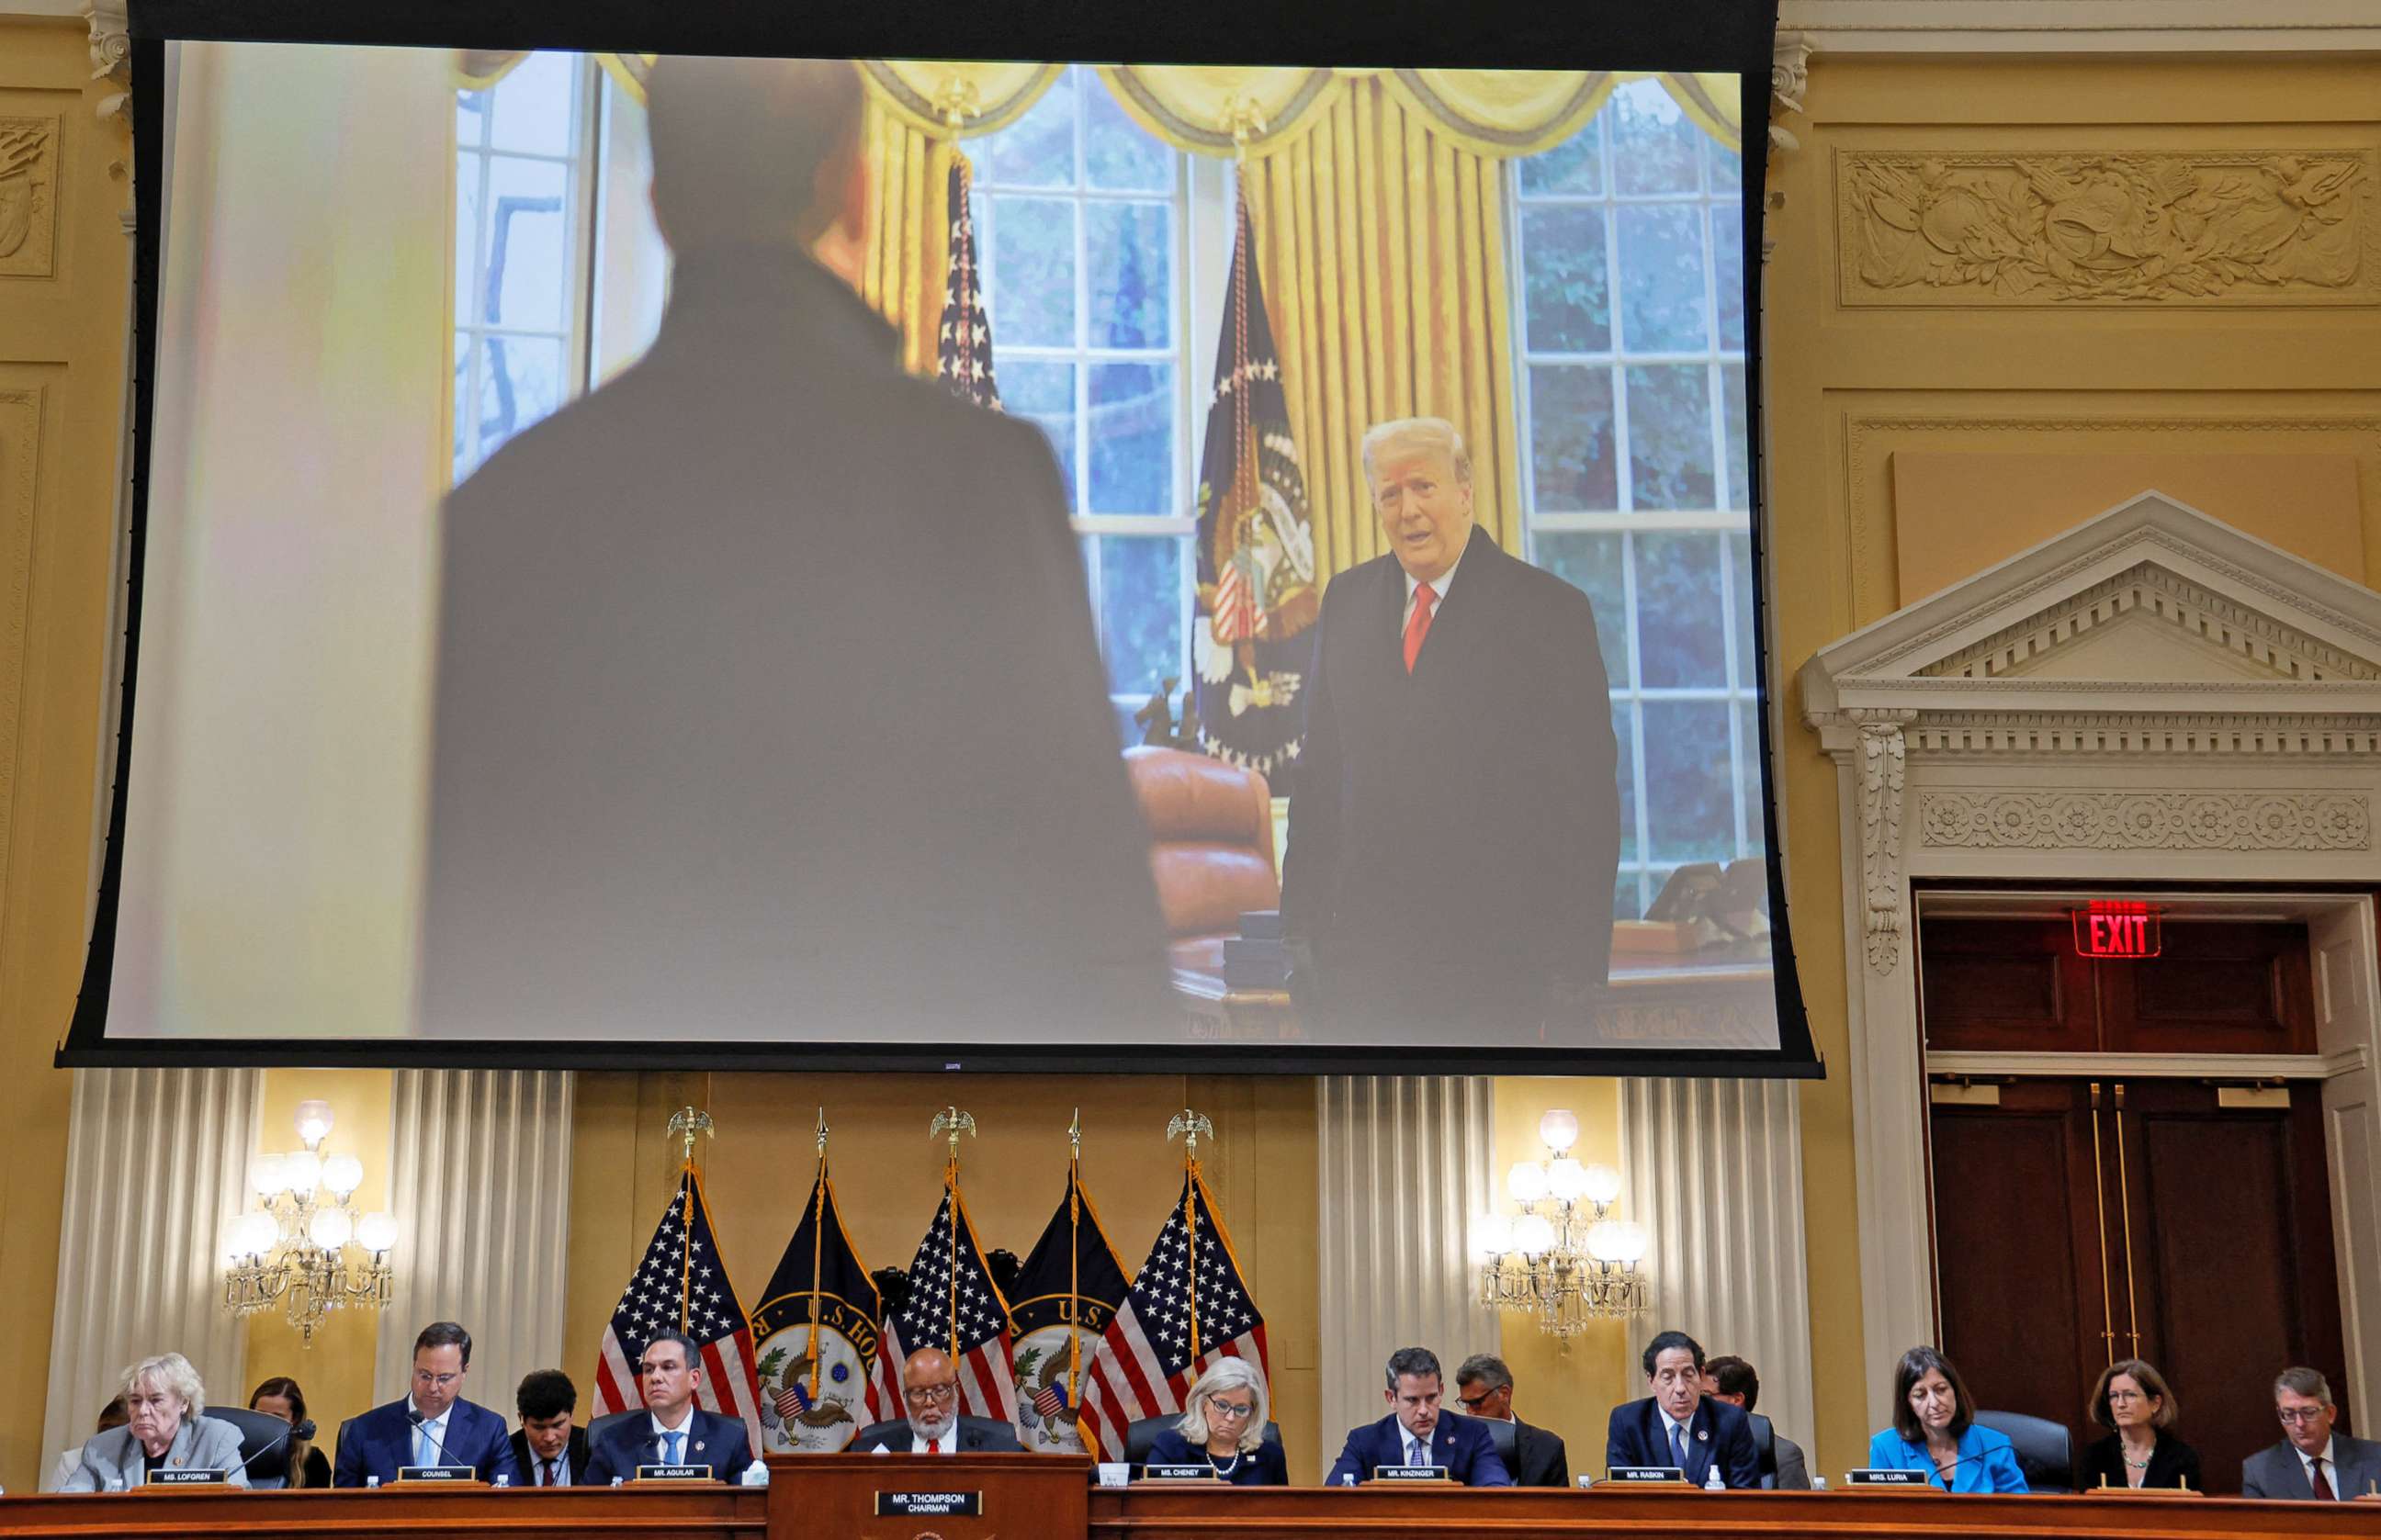 PHOTO: U.S. former President Donald Trump appears on the video screen during the hearing where the House Select Committee investigates the Jan. 6 Attack on the US Capitol, in Washington, D.C., June 16, 2022.